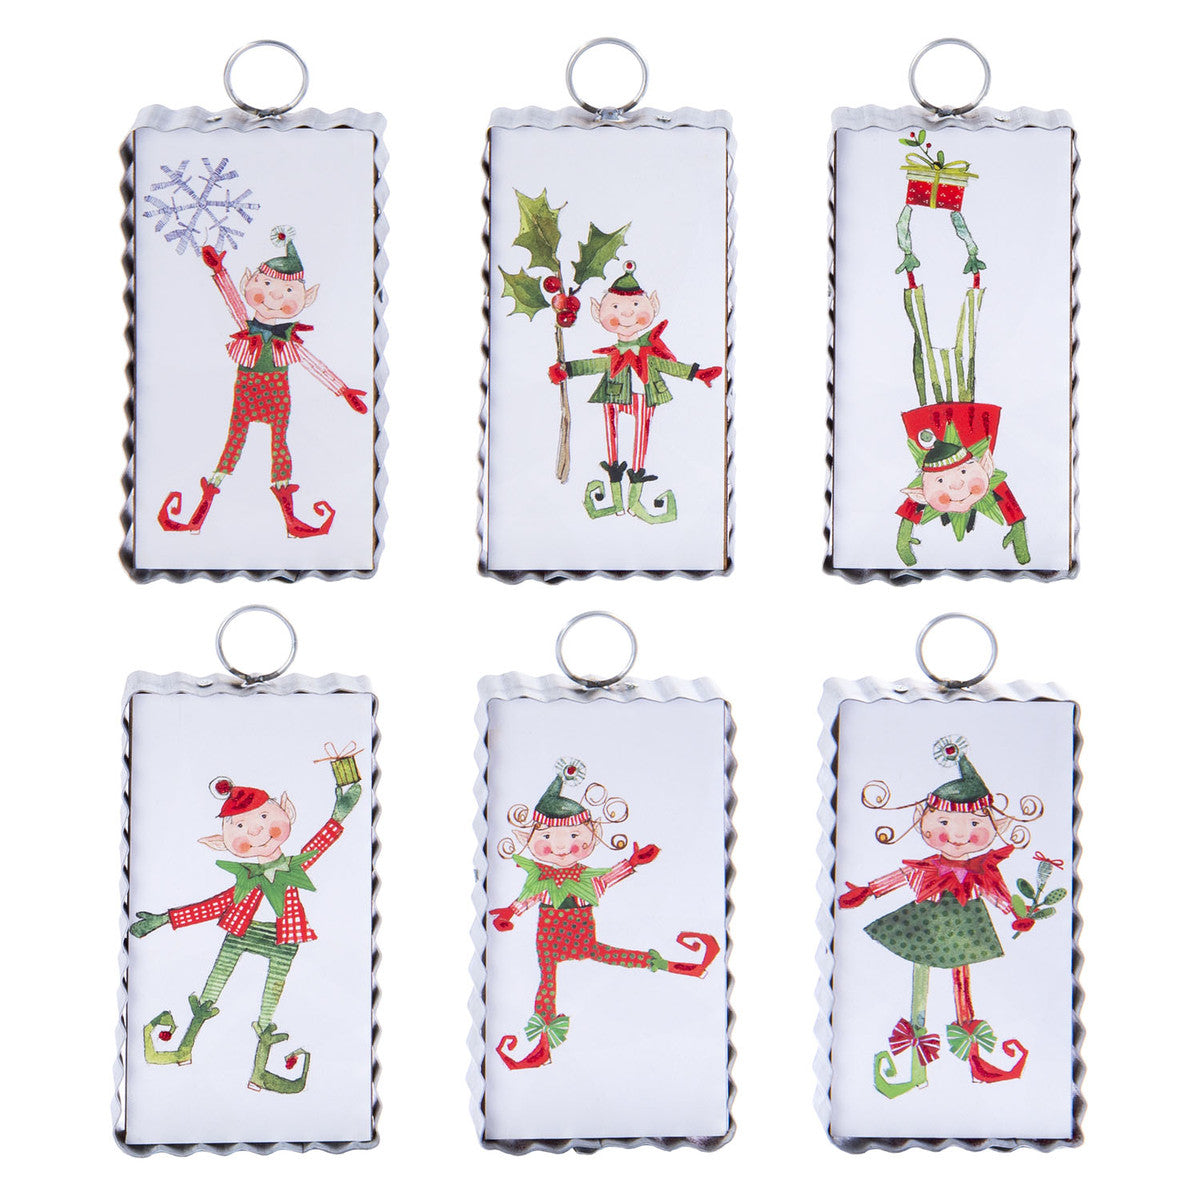 Silly Elf Ornaments